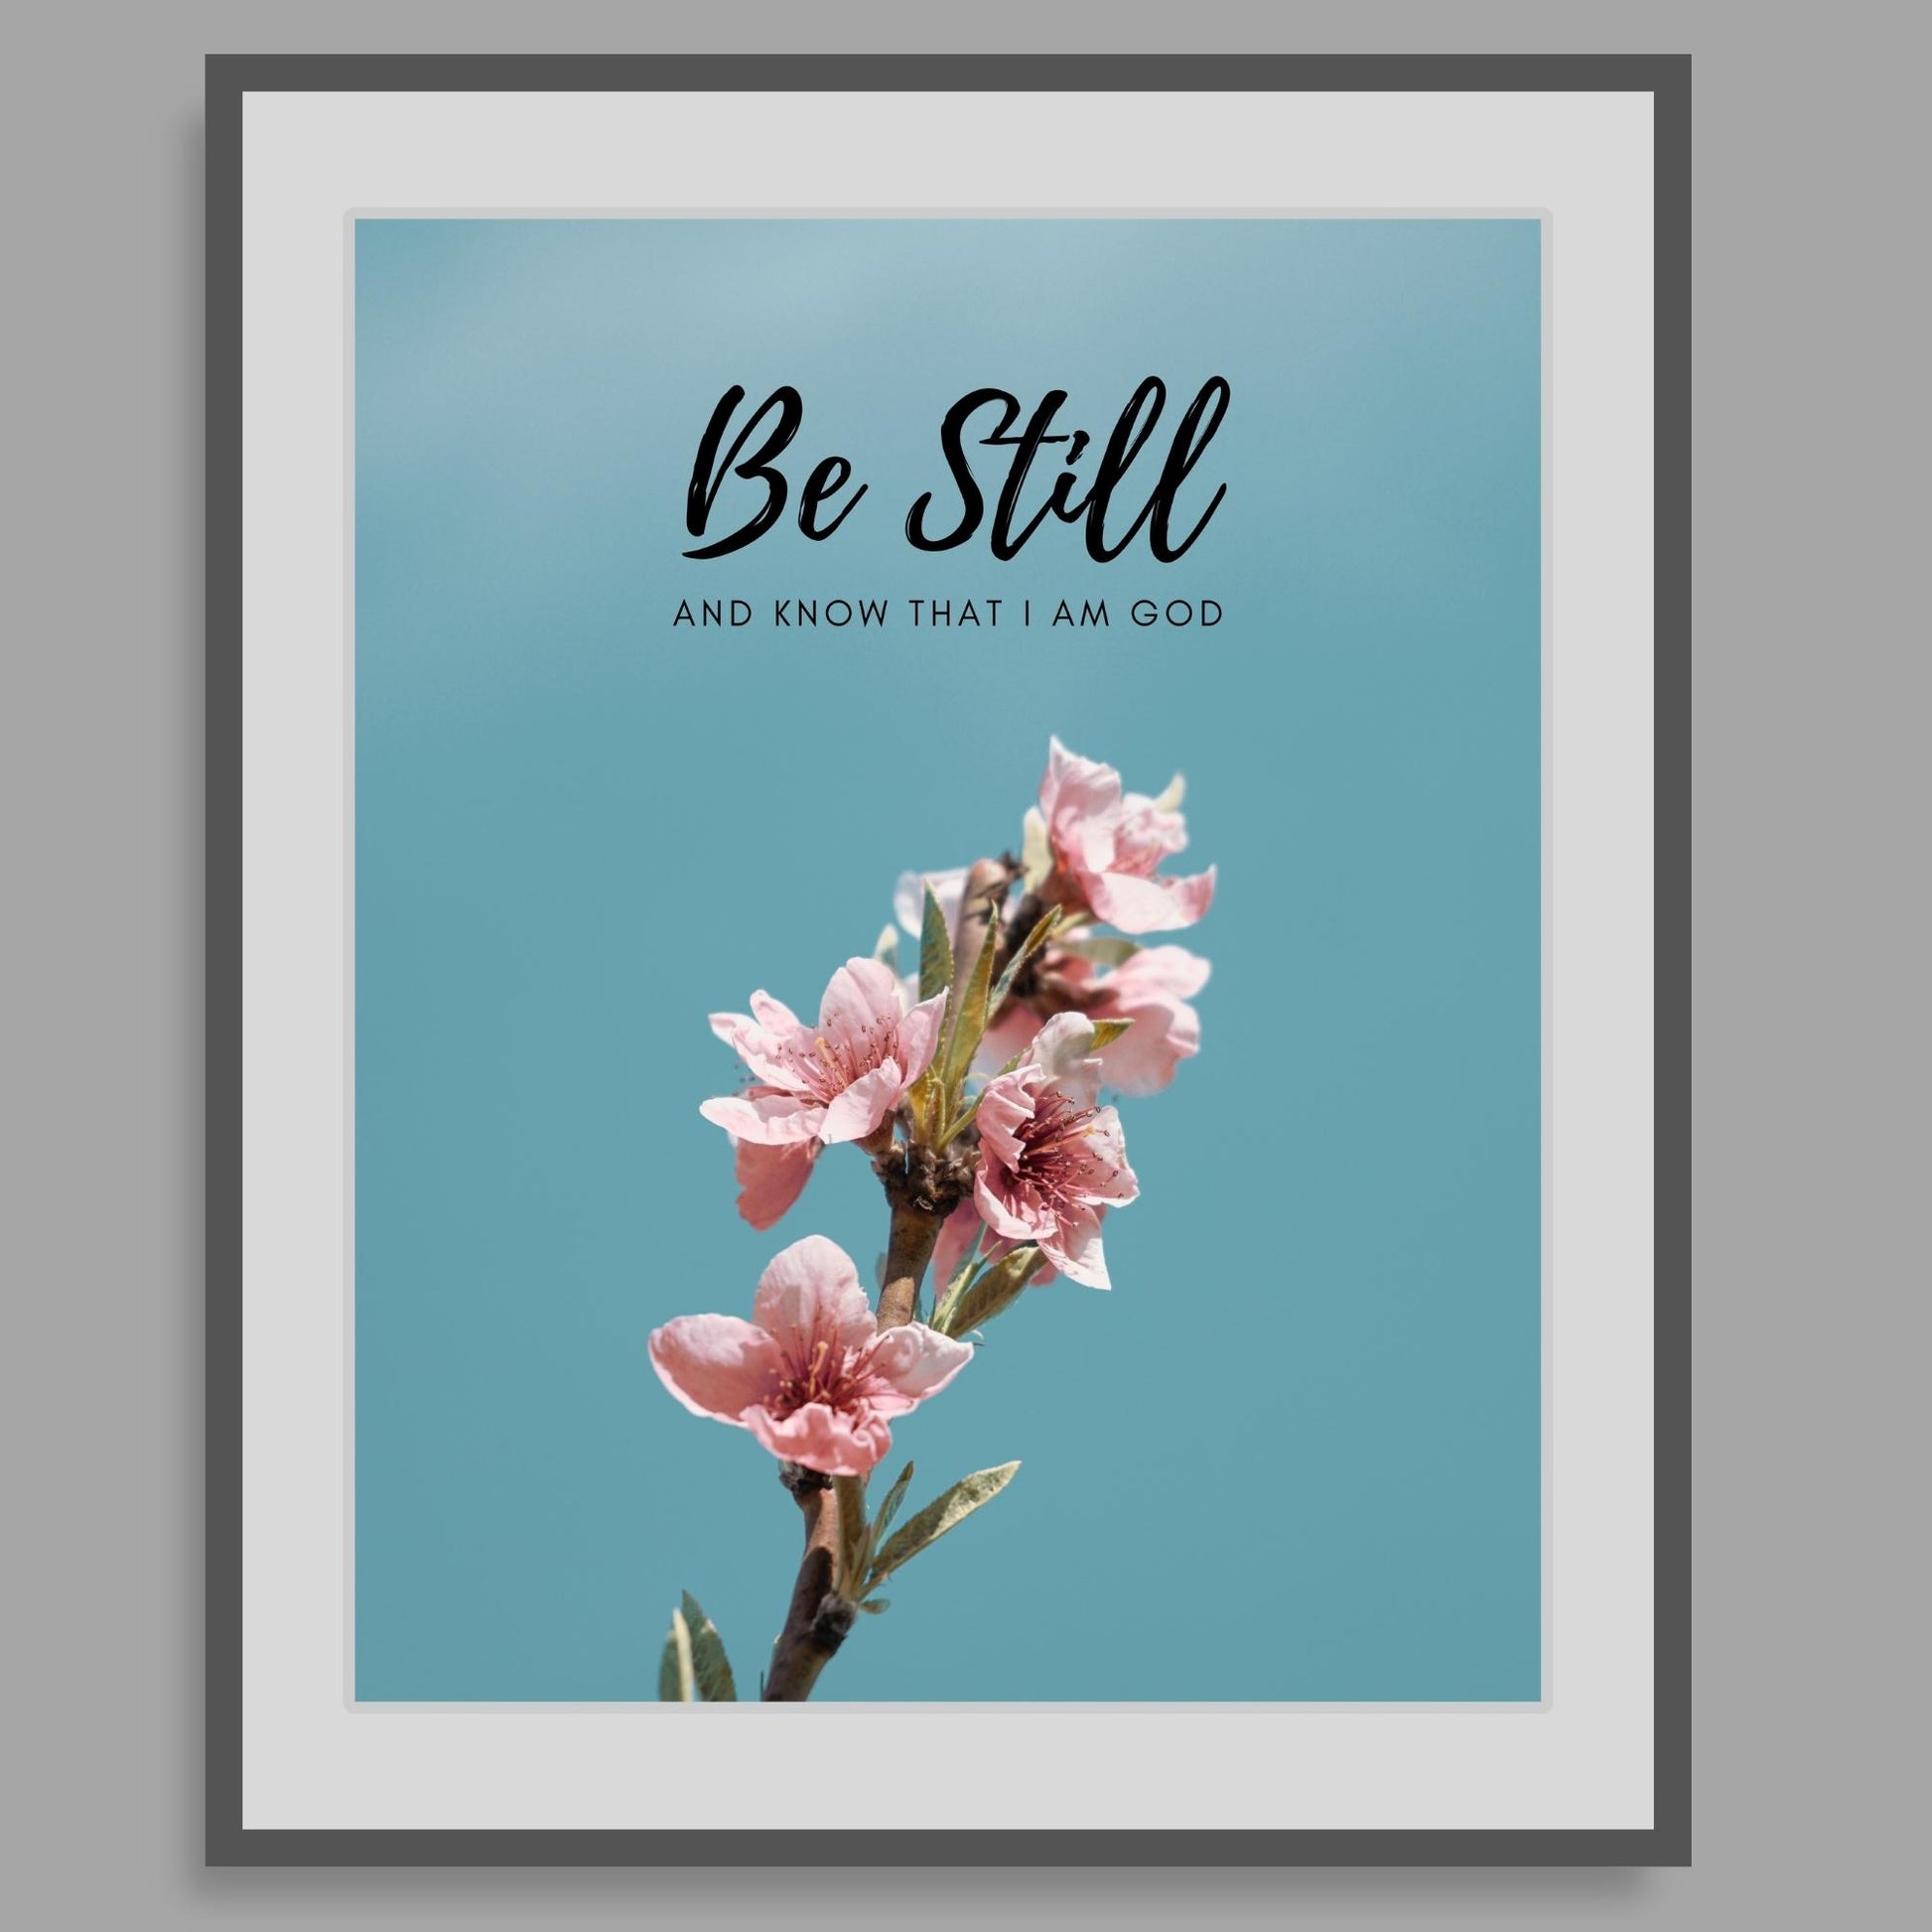 Inspirational Word Art - Be Still and know that I am God - Flower Design Wall Decor (8X10 print) choose from 2 text colors | shown with black text in medium gray frame on light gray wall | oak7west.com